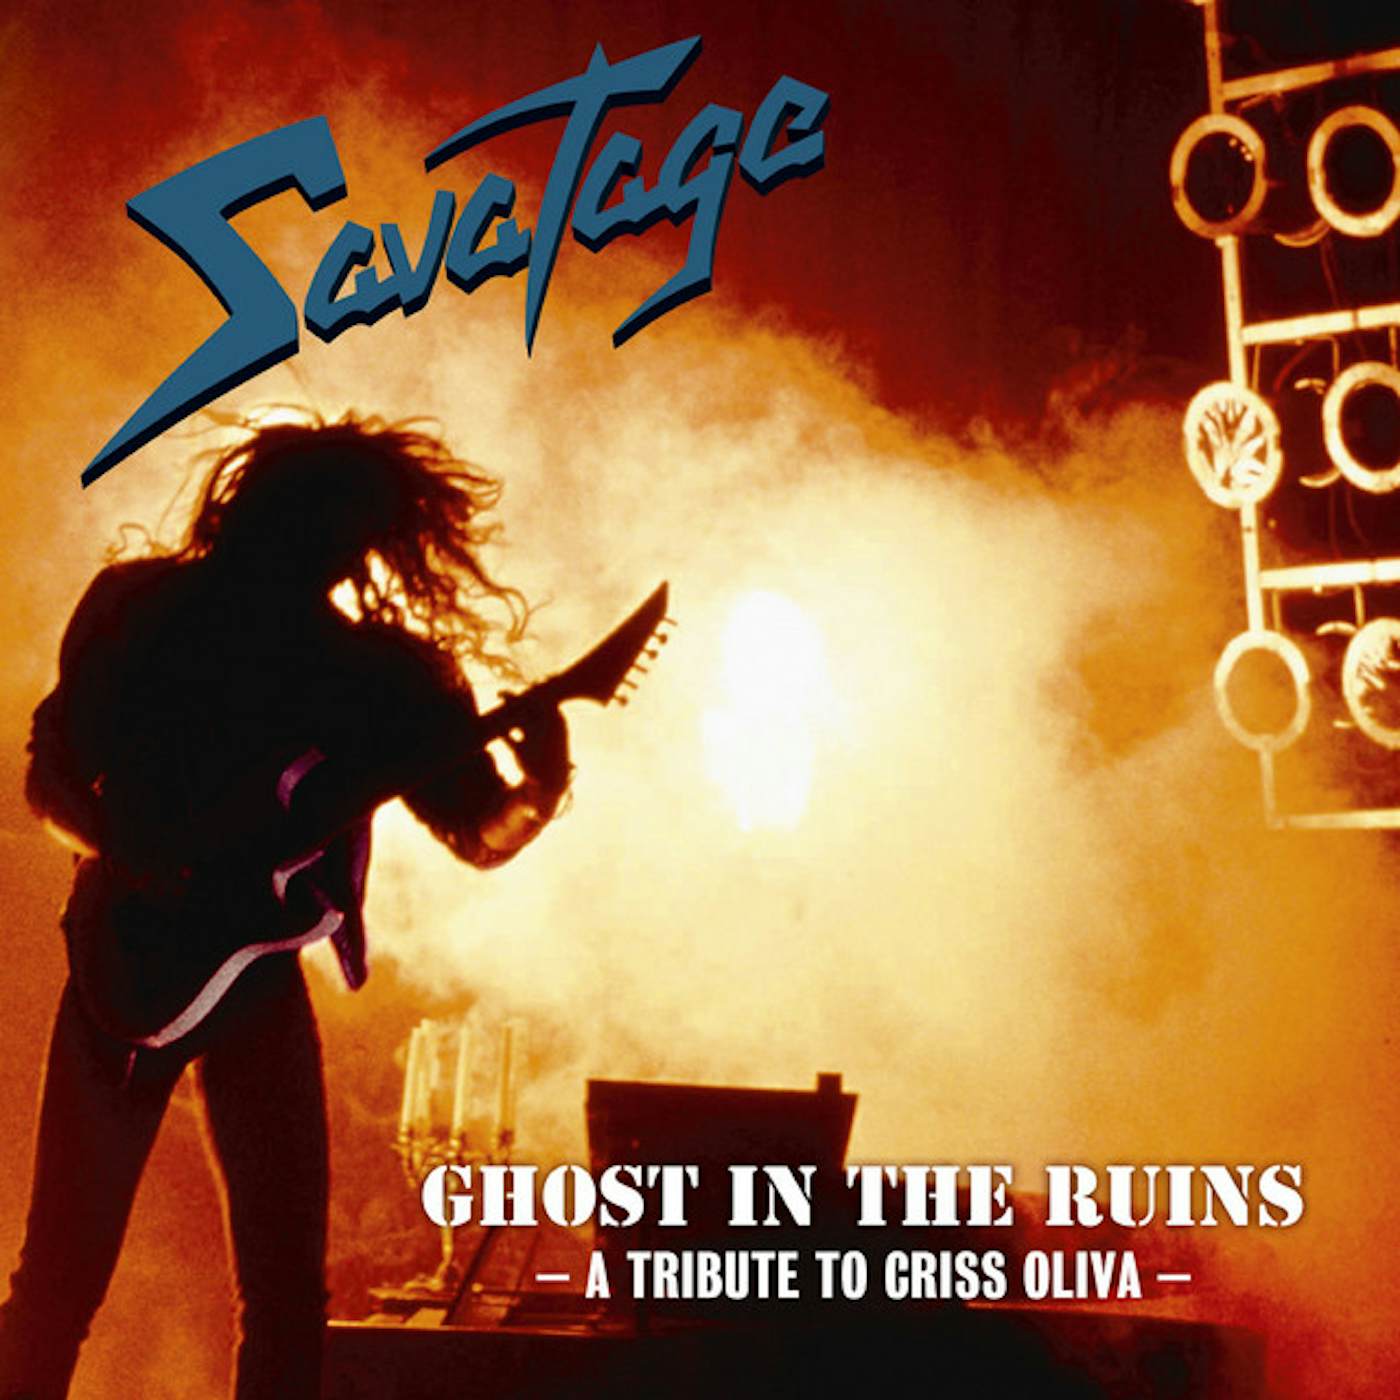 Savatage GHOST IN THE RUINS Vinyl Record